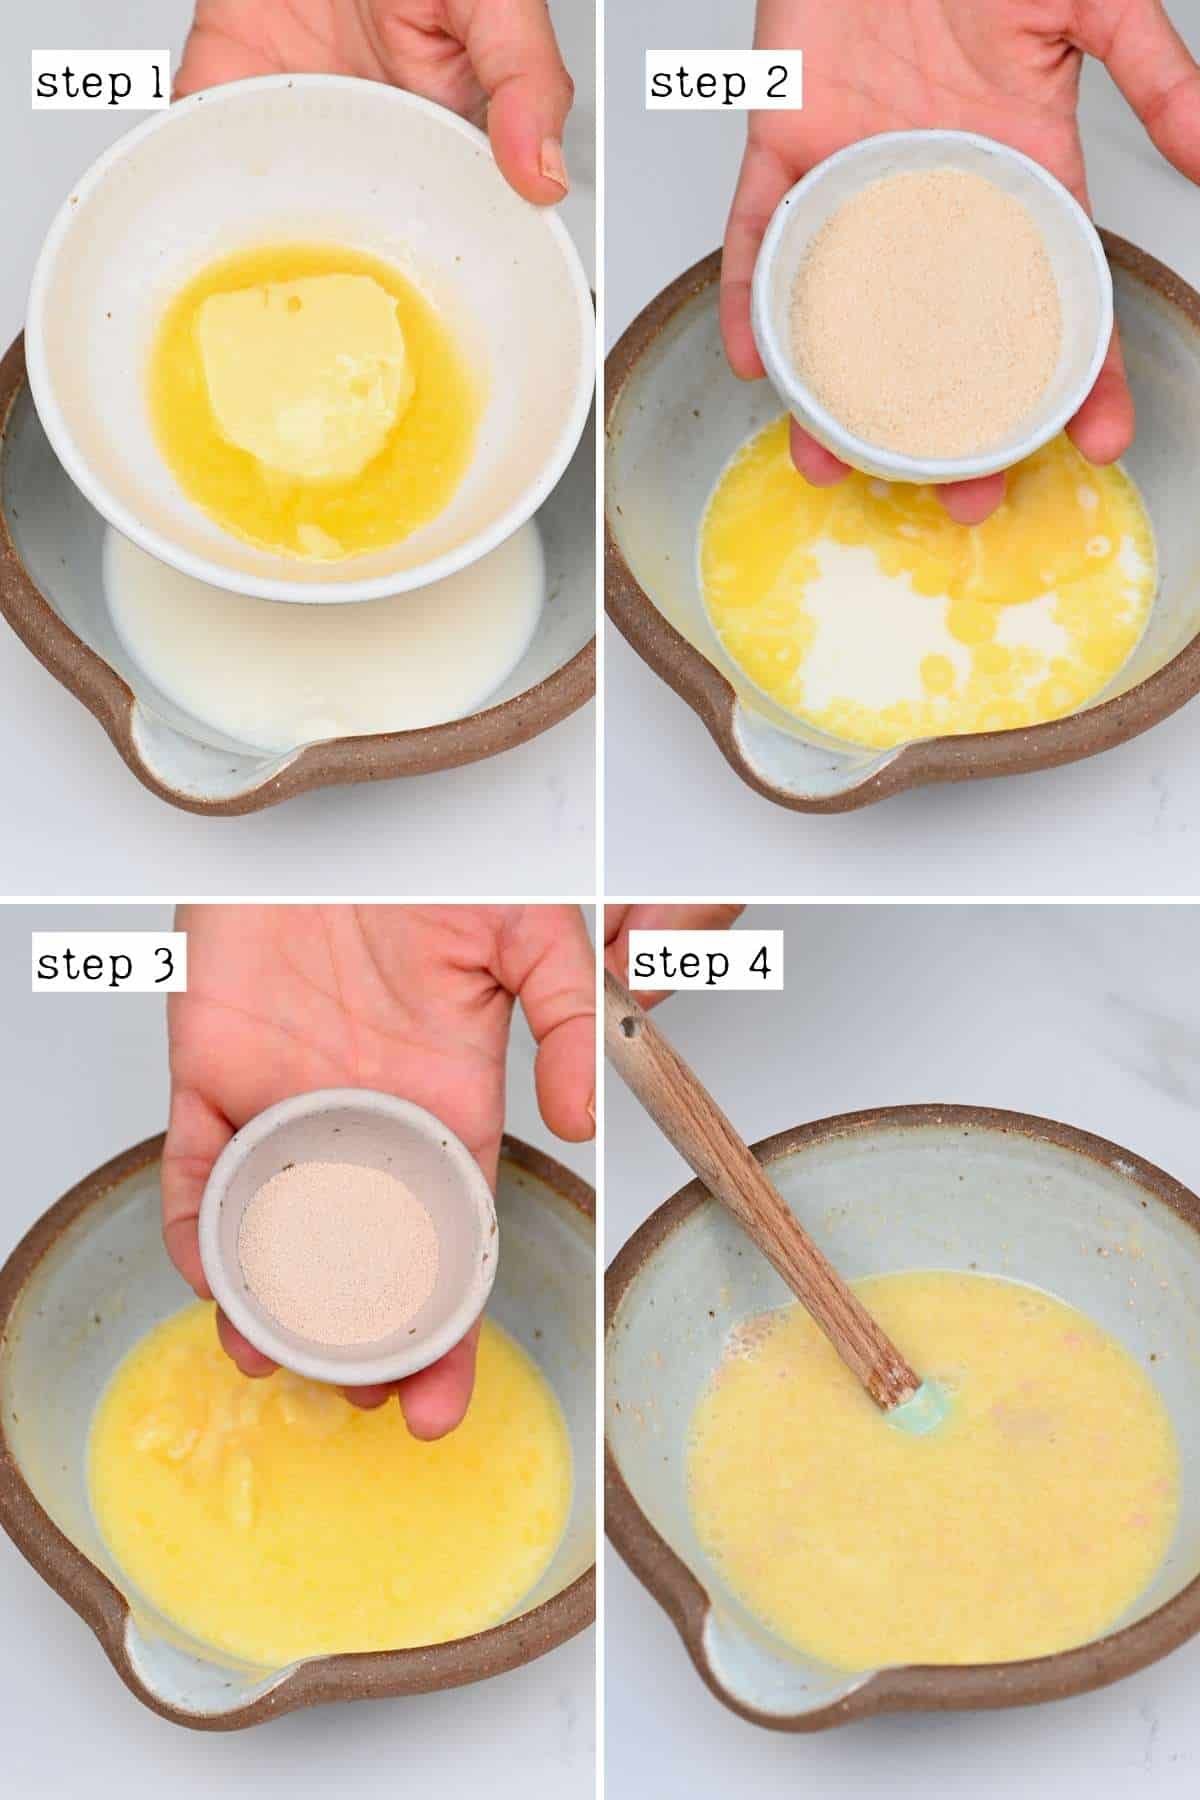 Steps for preparing yeast mixture for a brioche